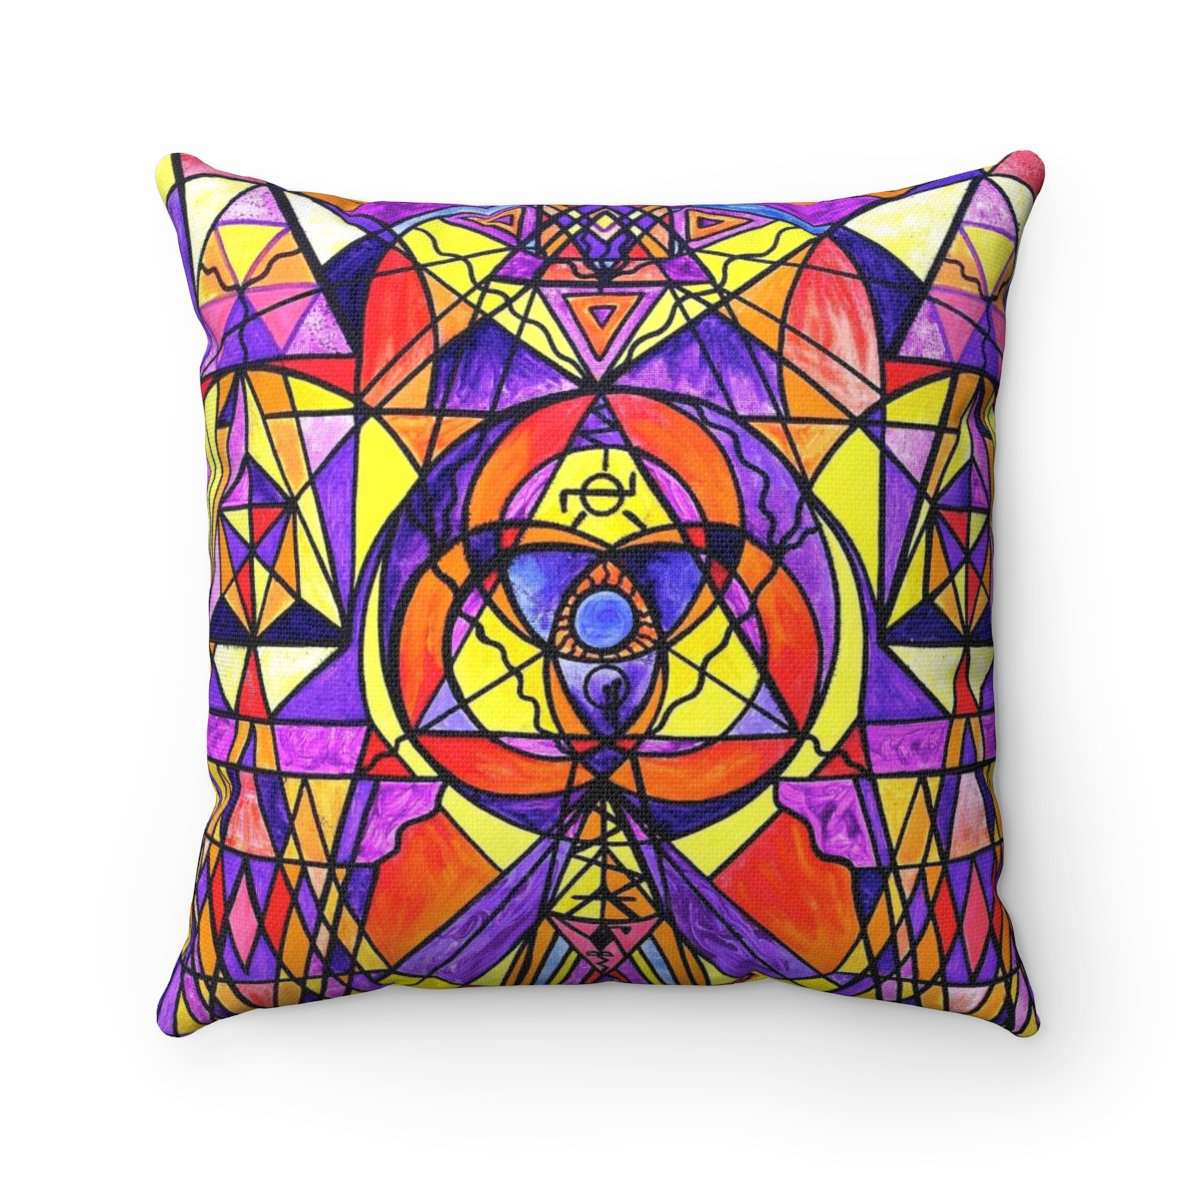 the-one-place-to-buy-the-destiny-grid-spun-polyester-square-pillow-on-sale_1.jpg